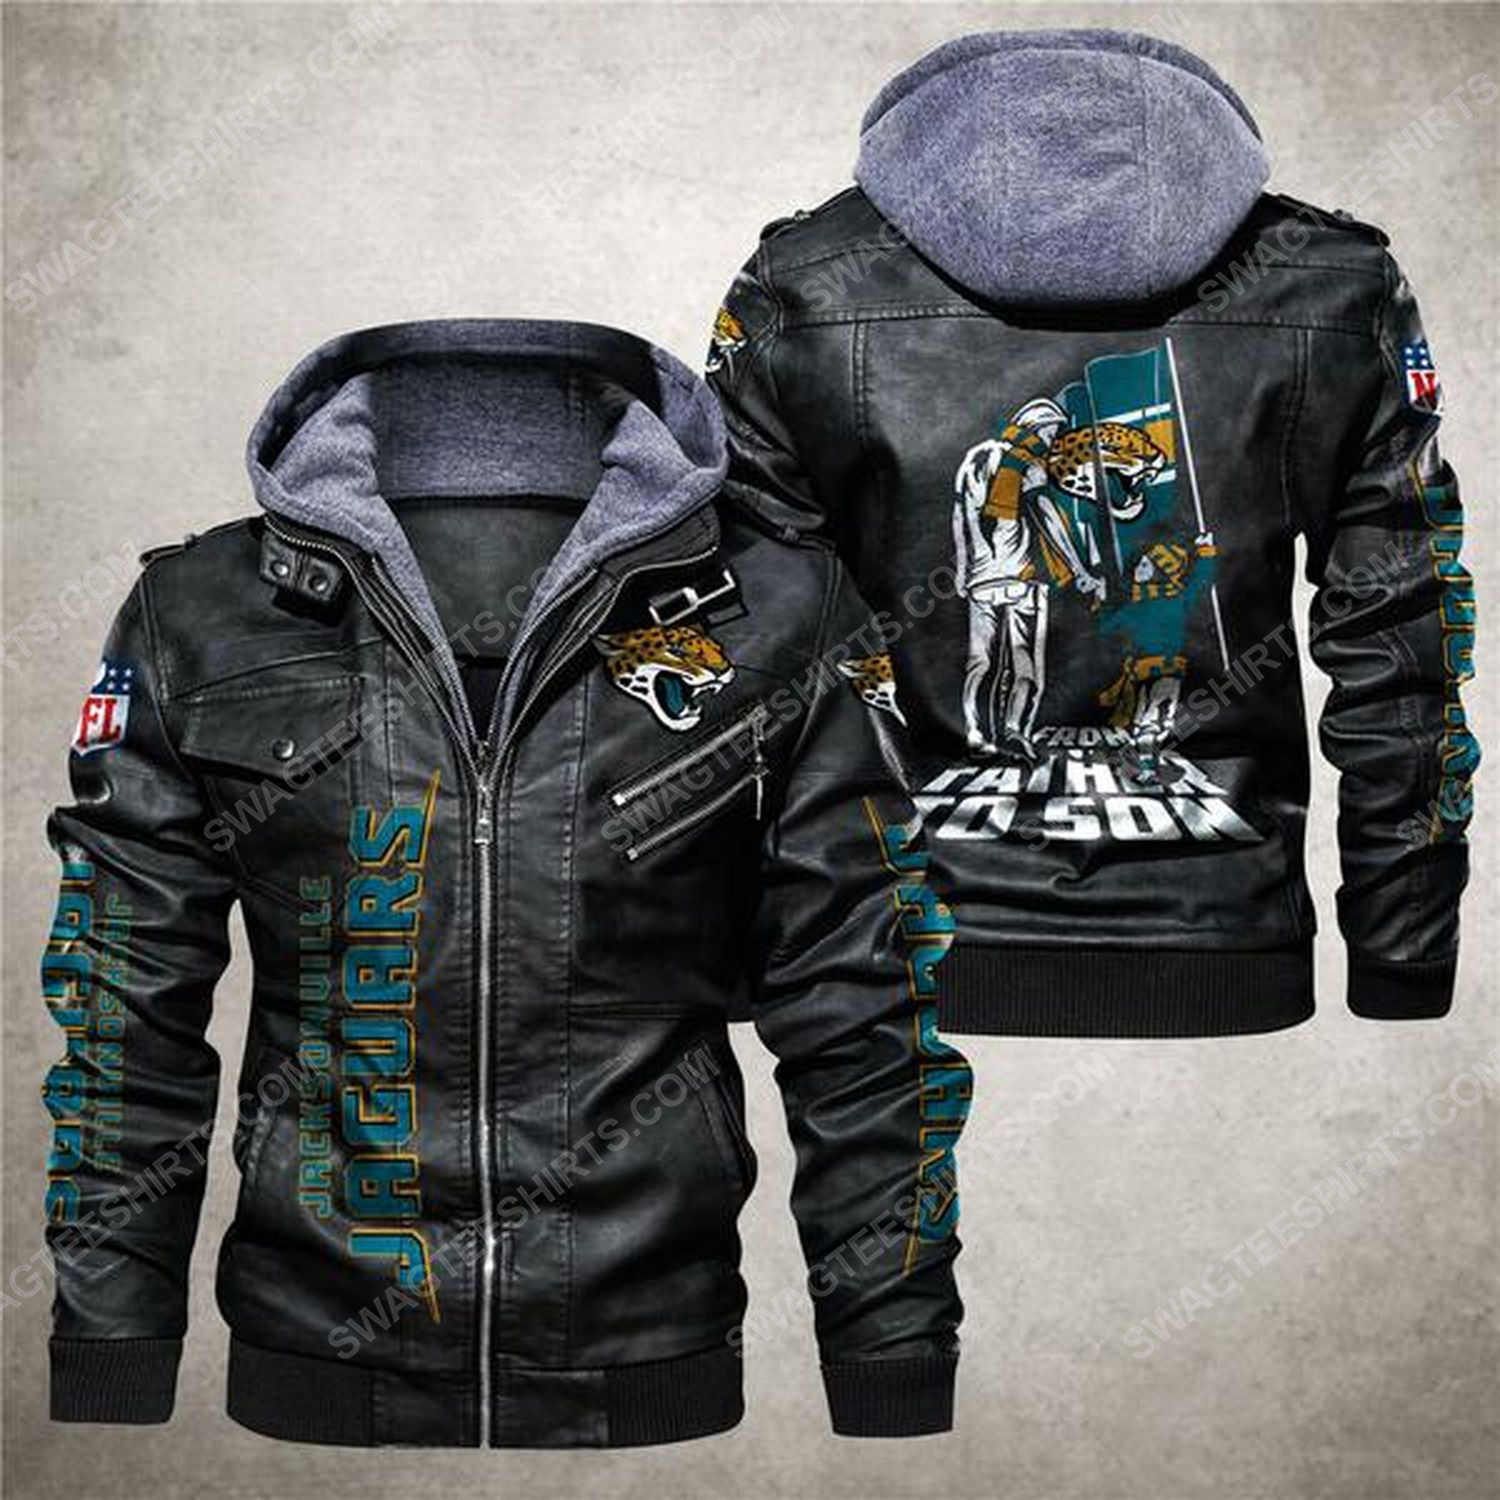 National football league jacksonville jaguars from father to son leather jacket - black